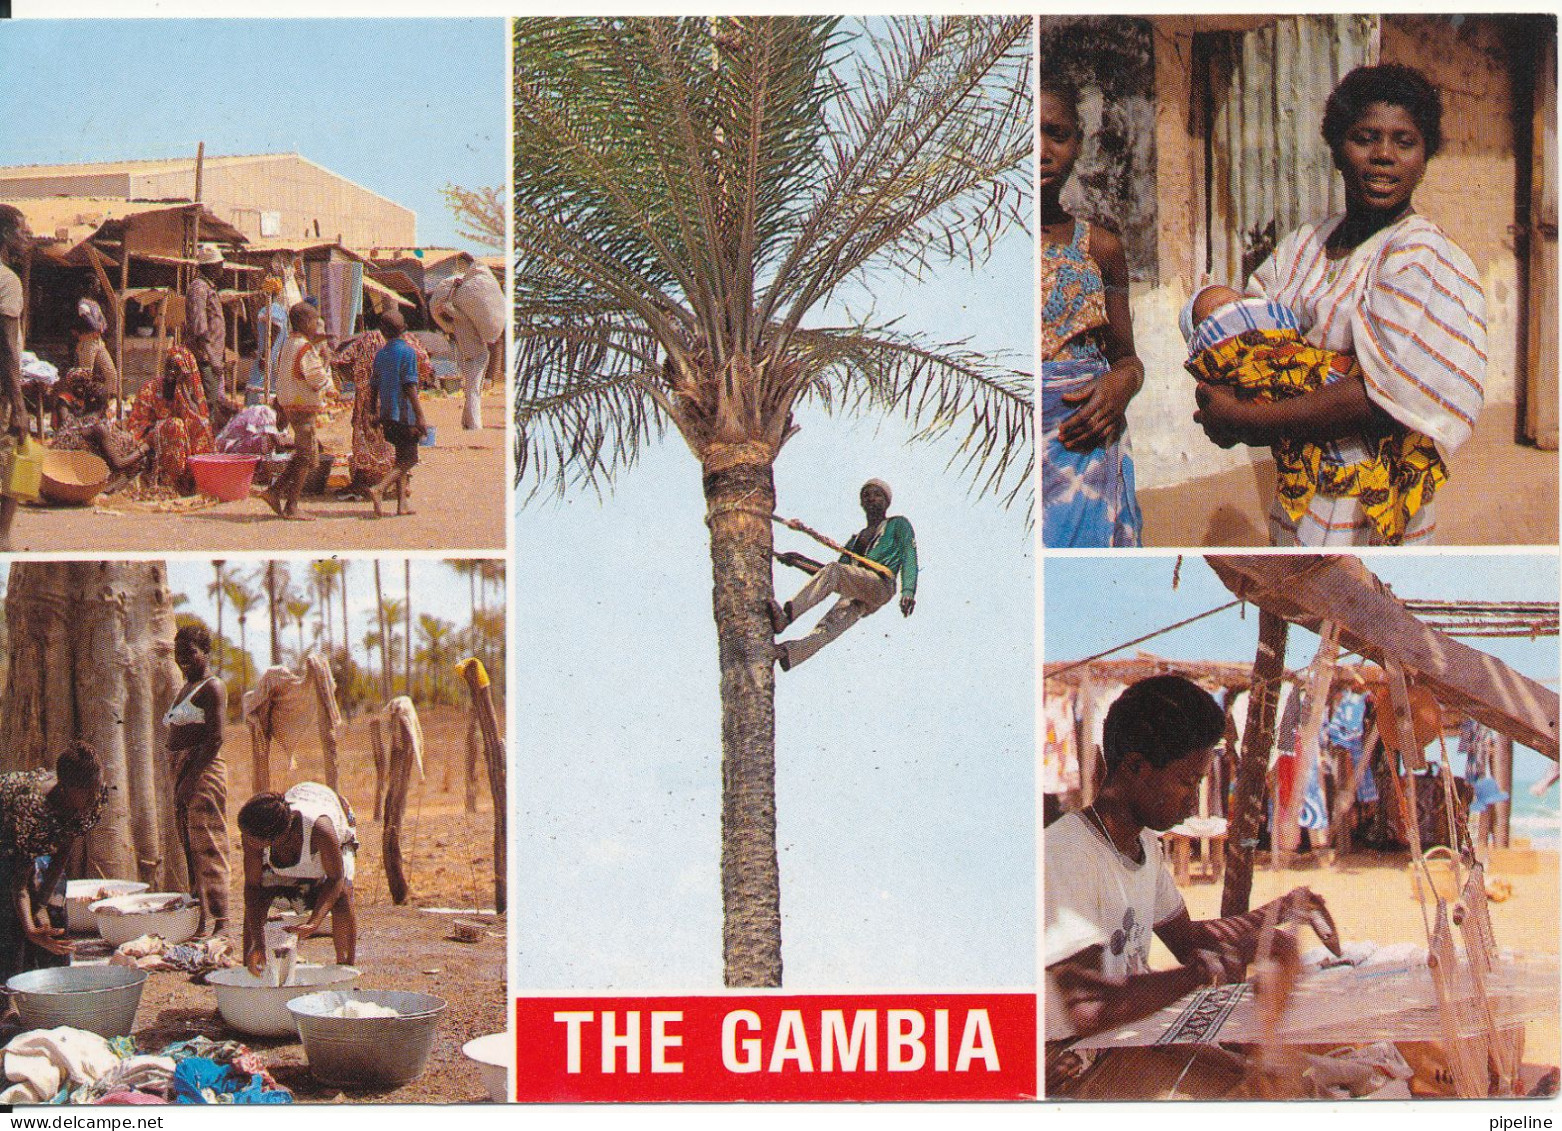 Gambia Postcard Sent To Denmark (Scenes From Local Life) - Gambia